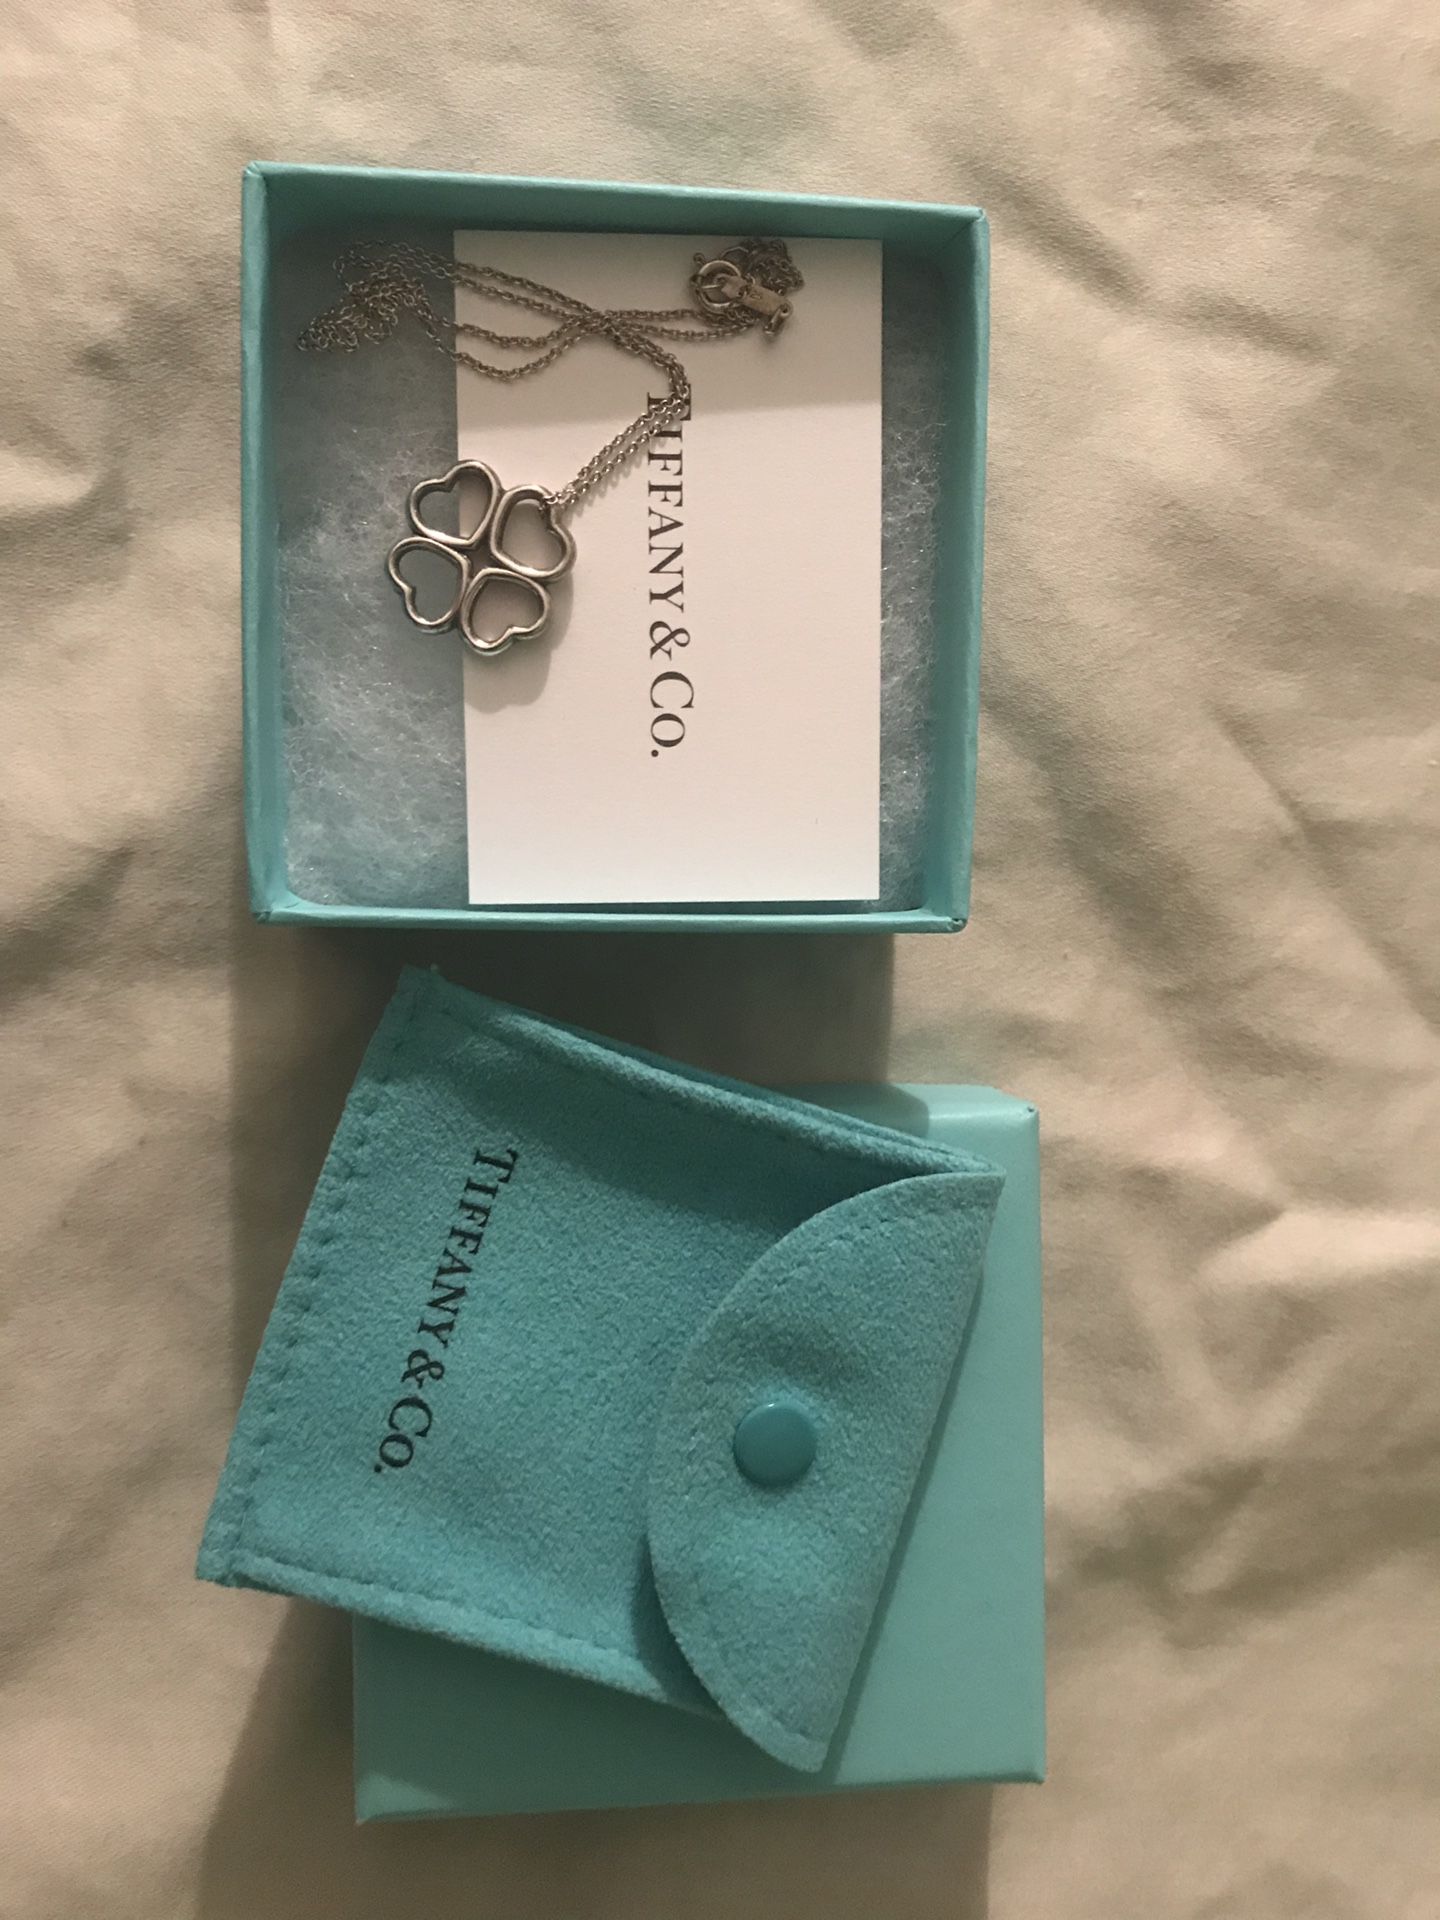 Tiffany necklace and charm